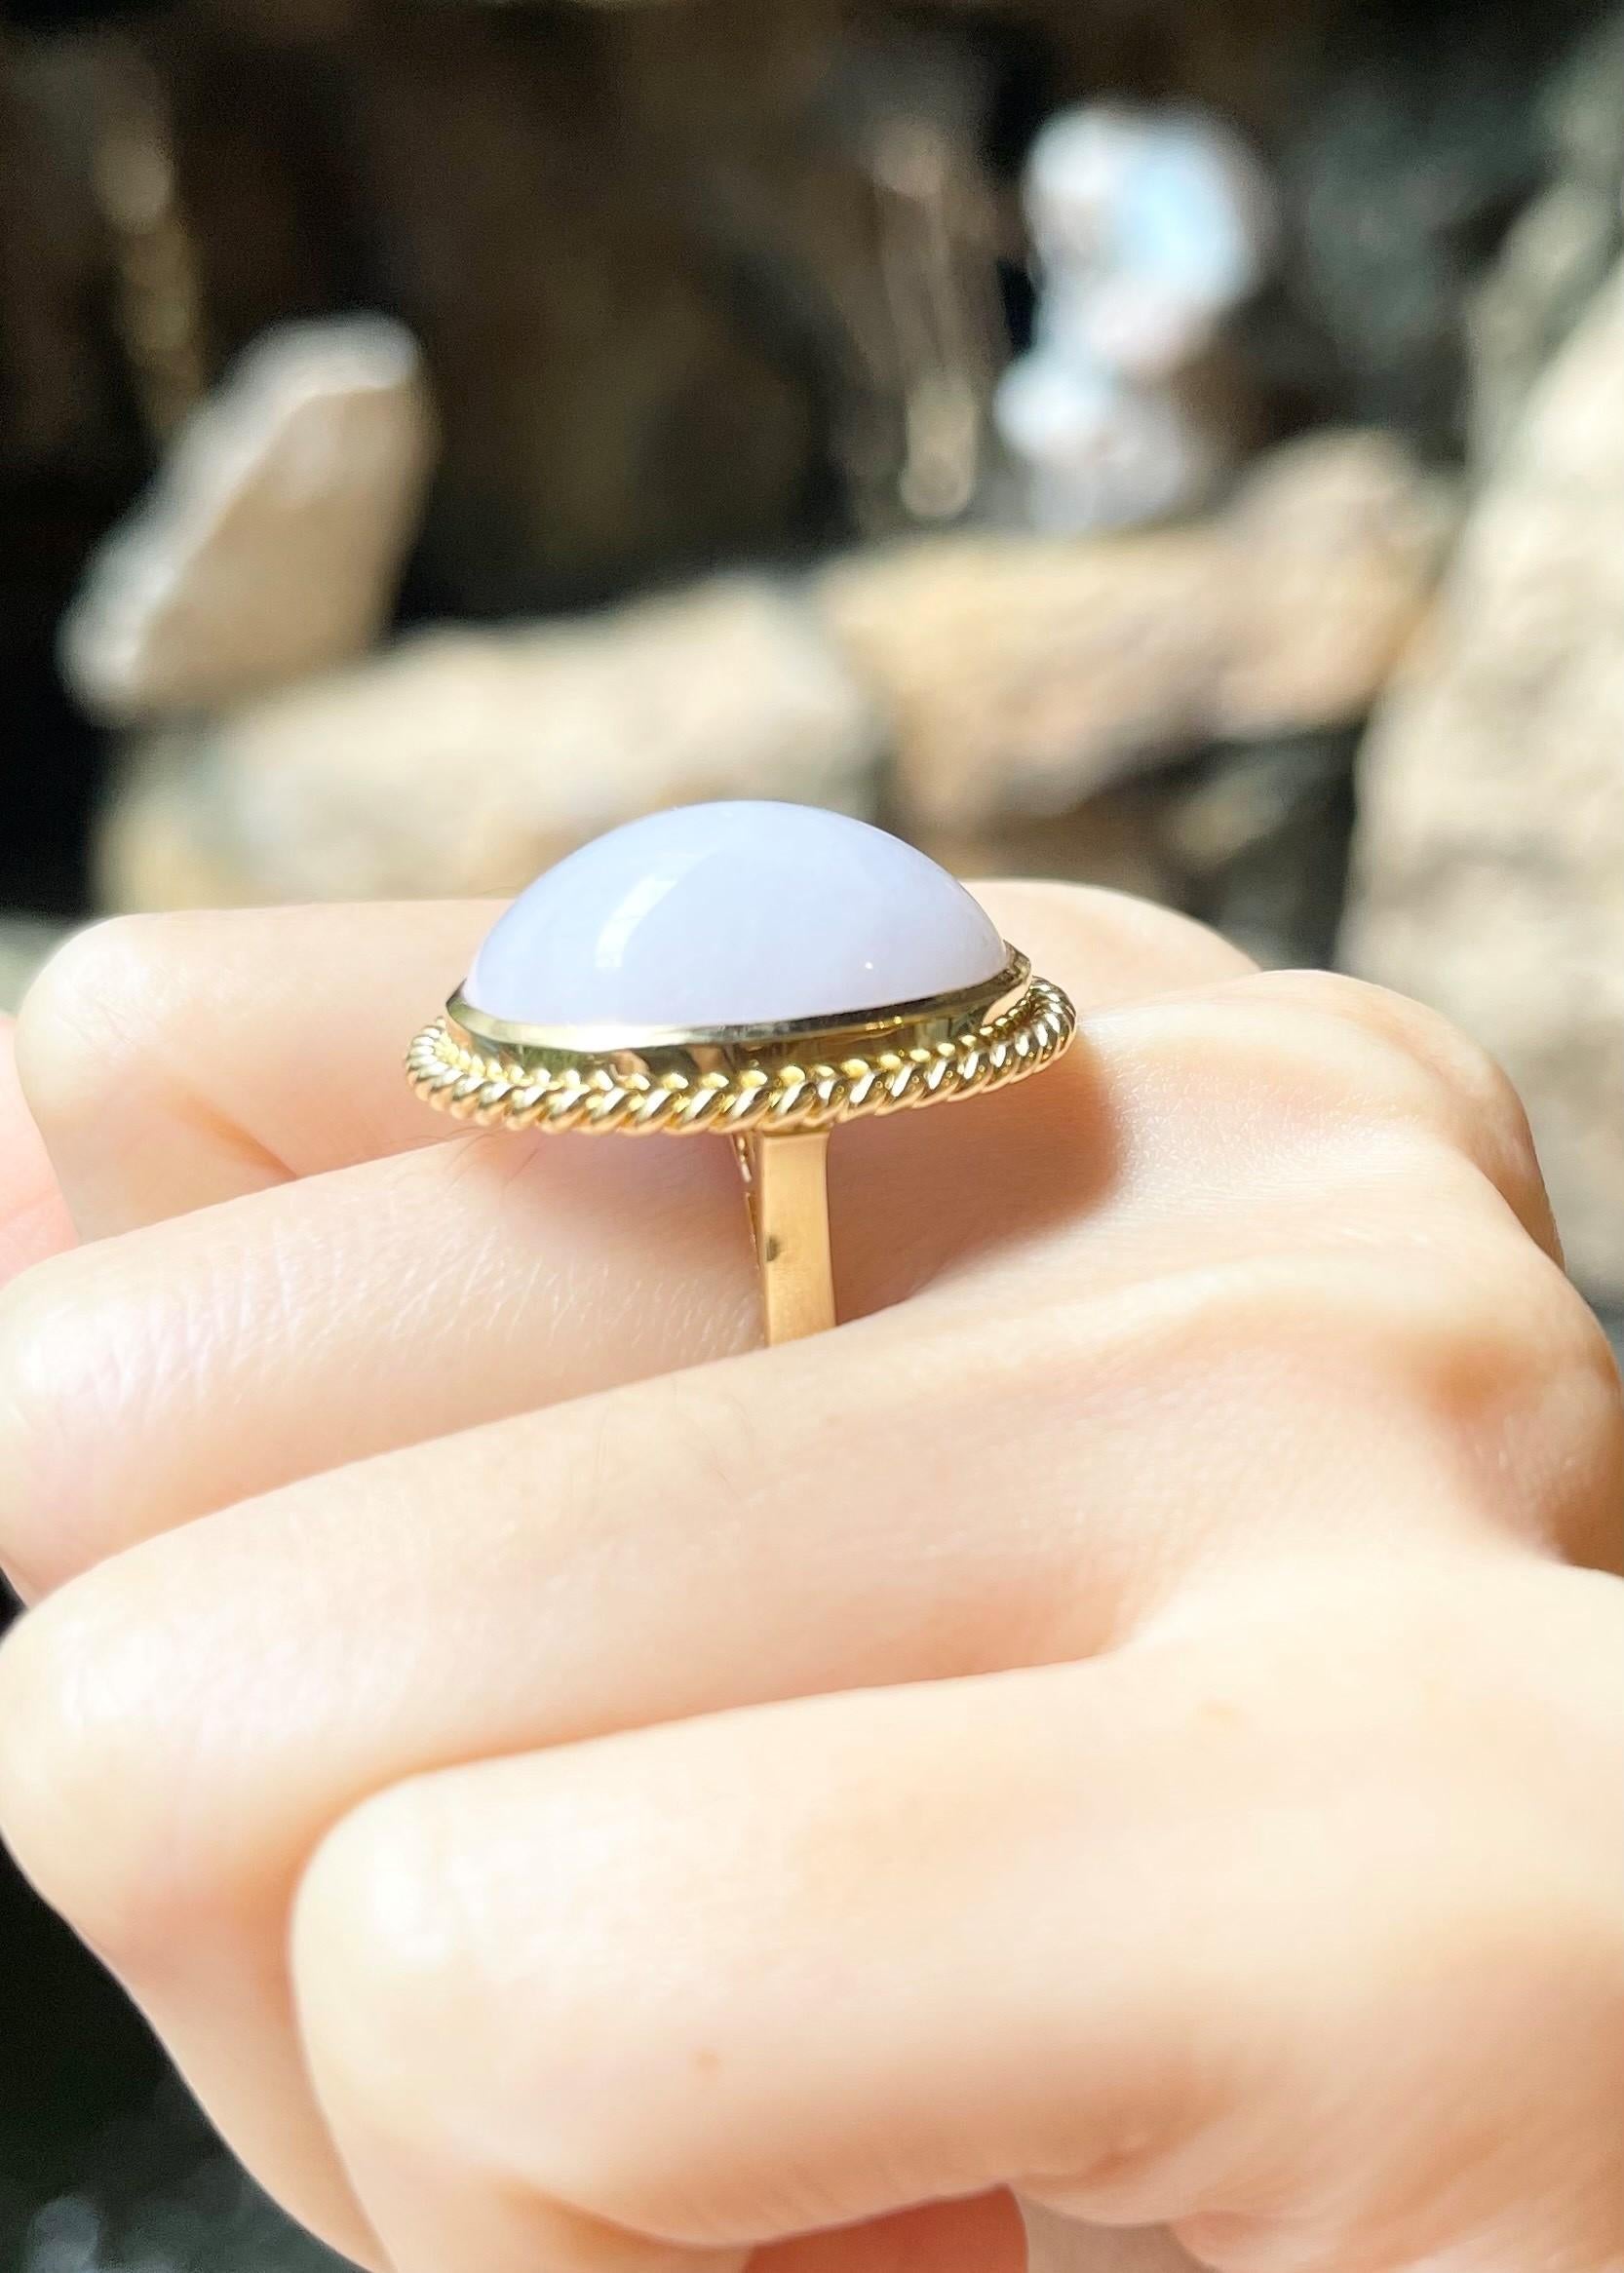 Lavender Jade 32.19 carats Ring set in 18K Gold Settings

Width:  2.2 cm 
Length: 2.5 cm
Ring Size: 53
Total Weight: 16.03 grams

